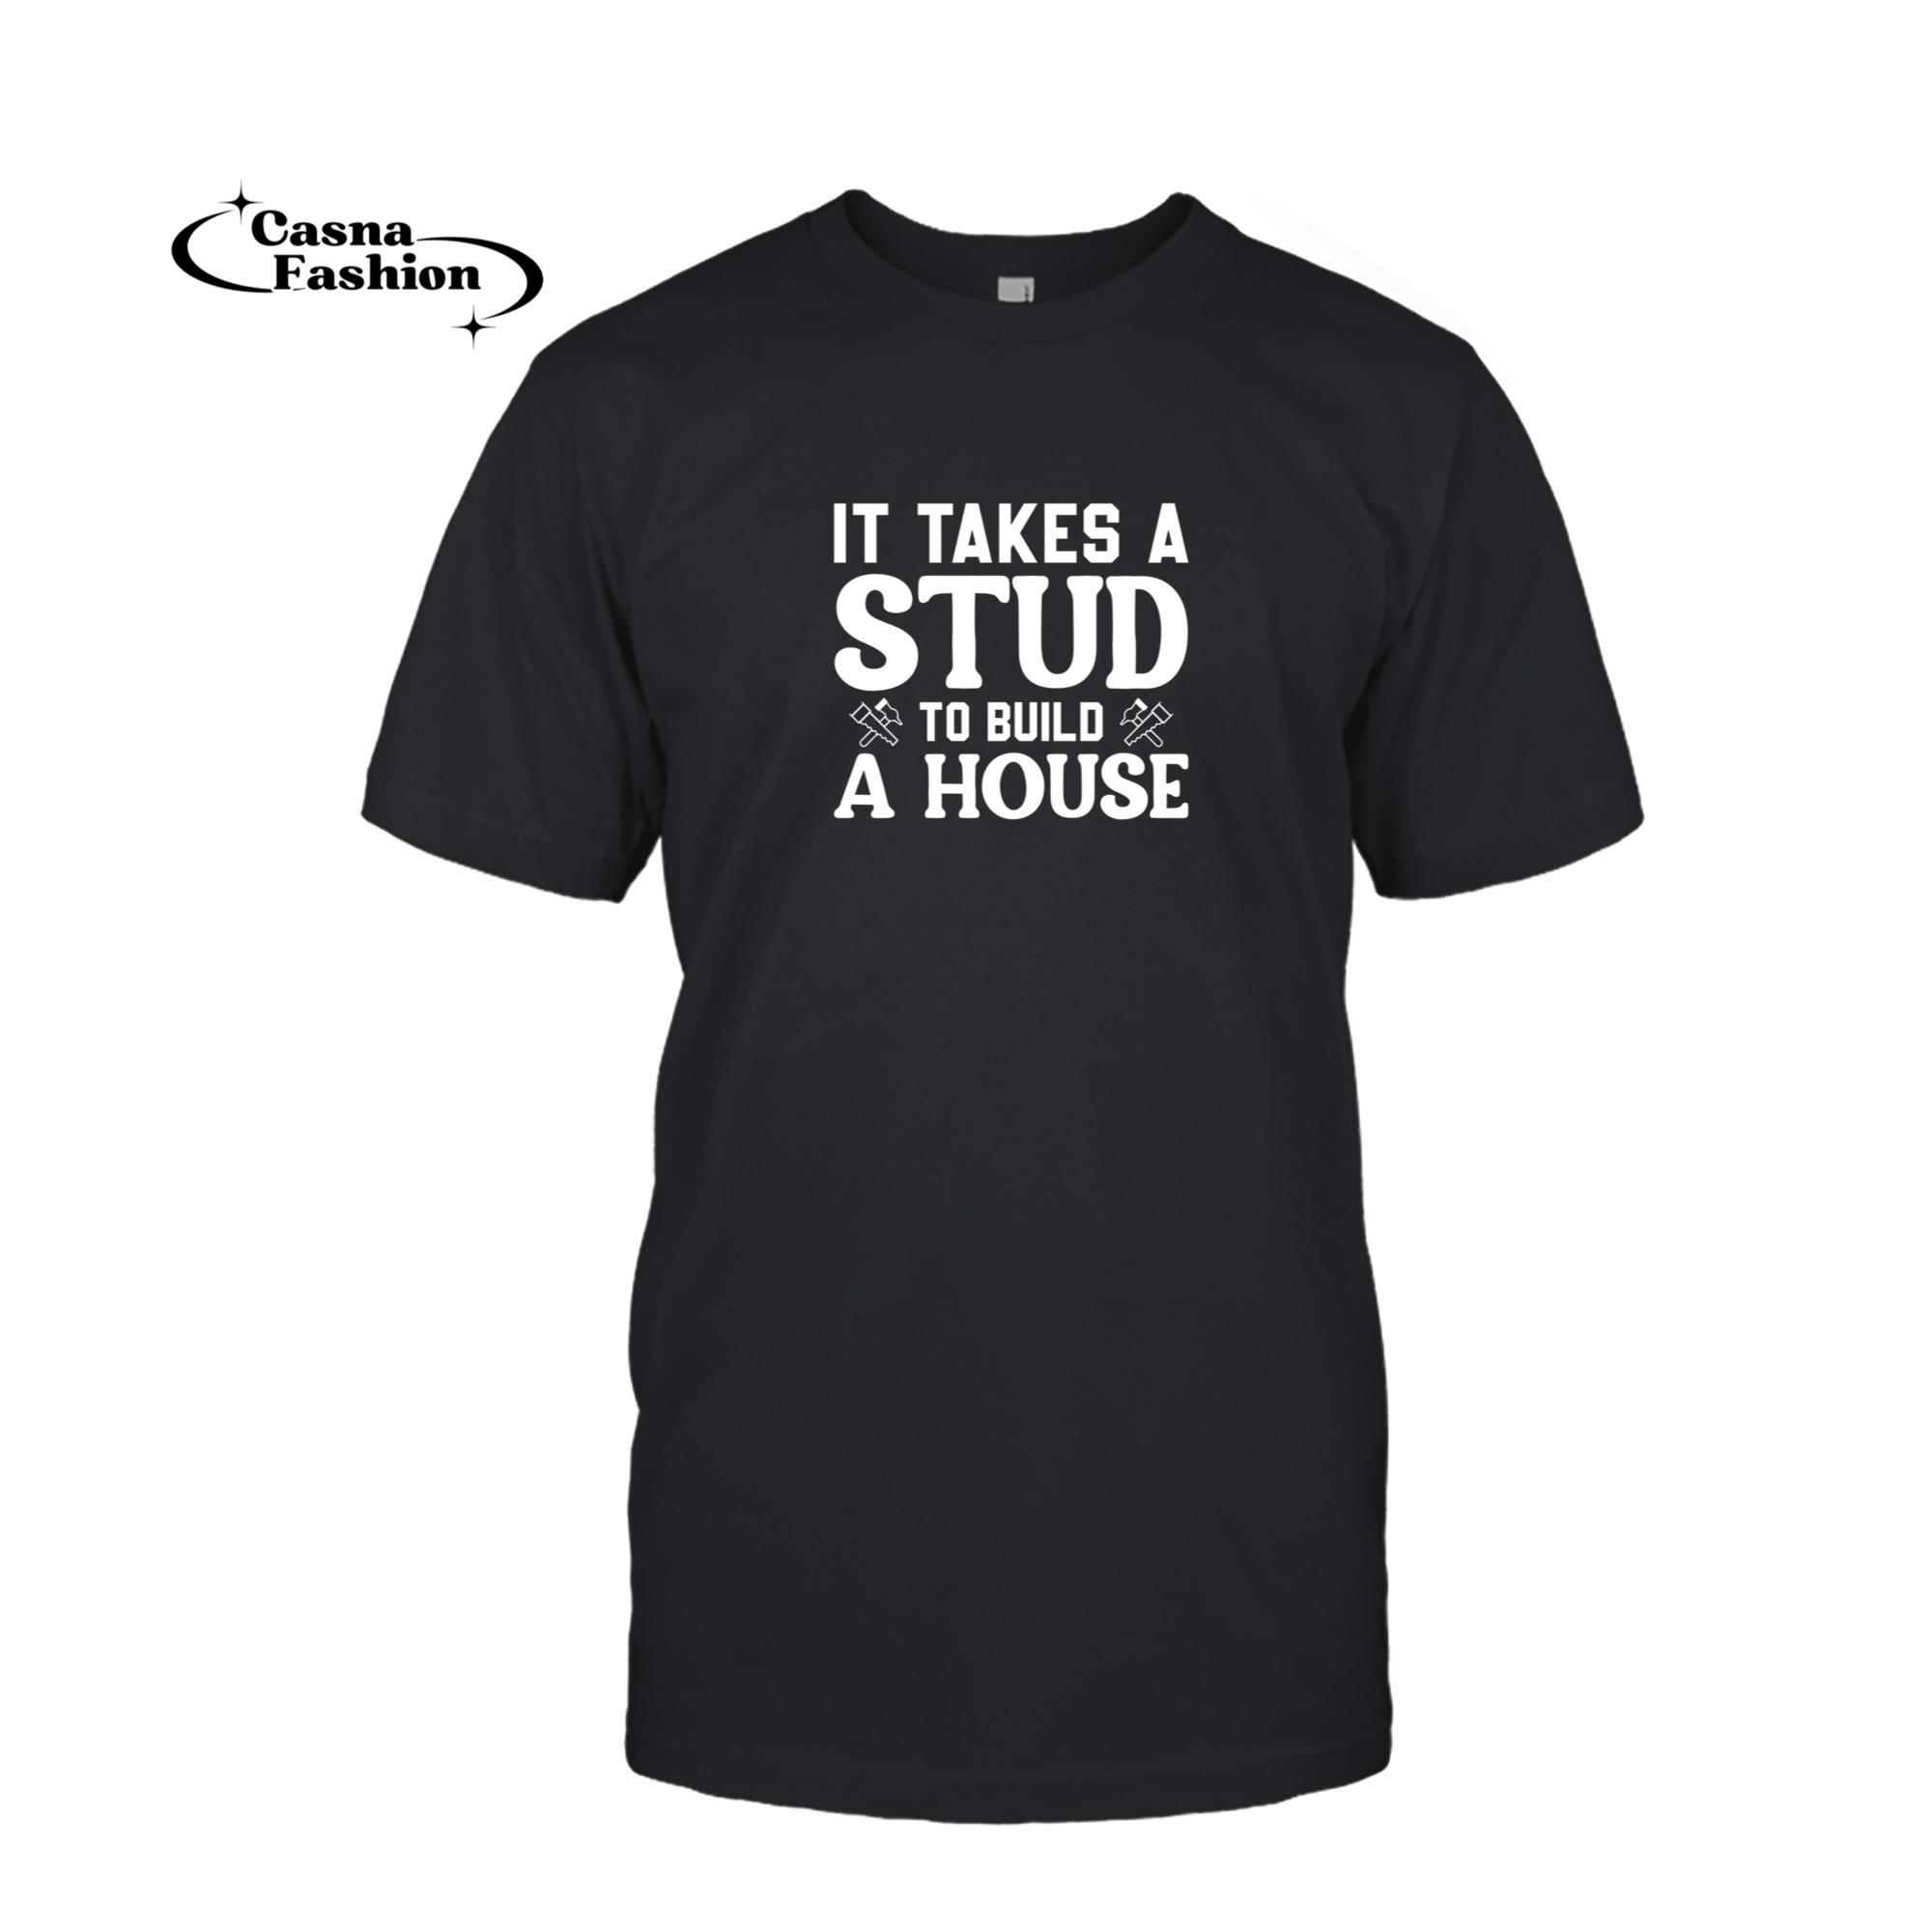 casnafashion_T-shirt_Carpenter - It Takes A Stud To Build A House Pullover Hoodie_T-shirt_Black